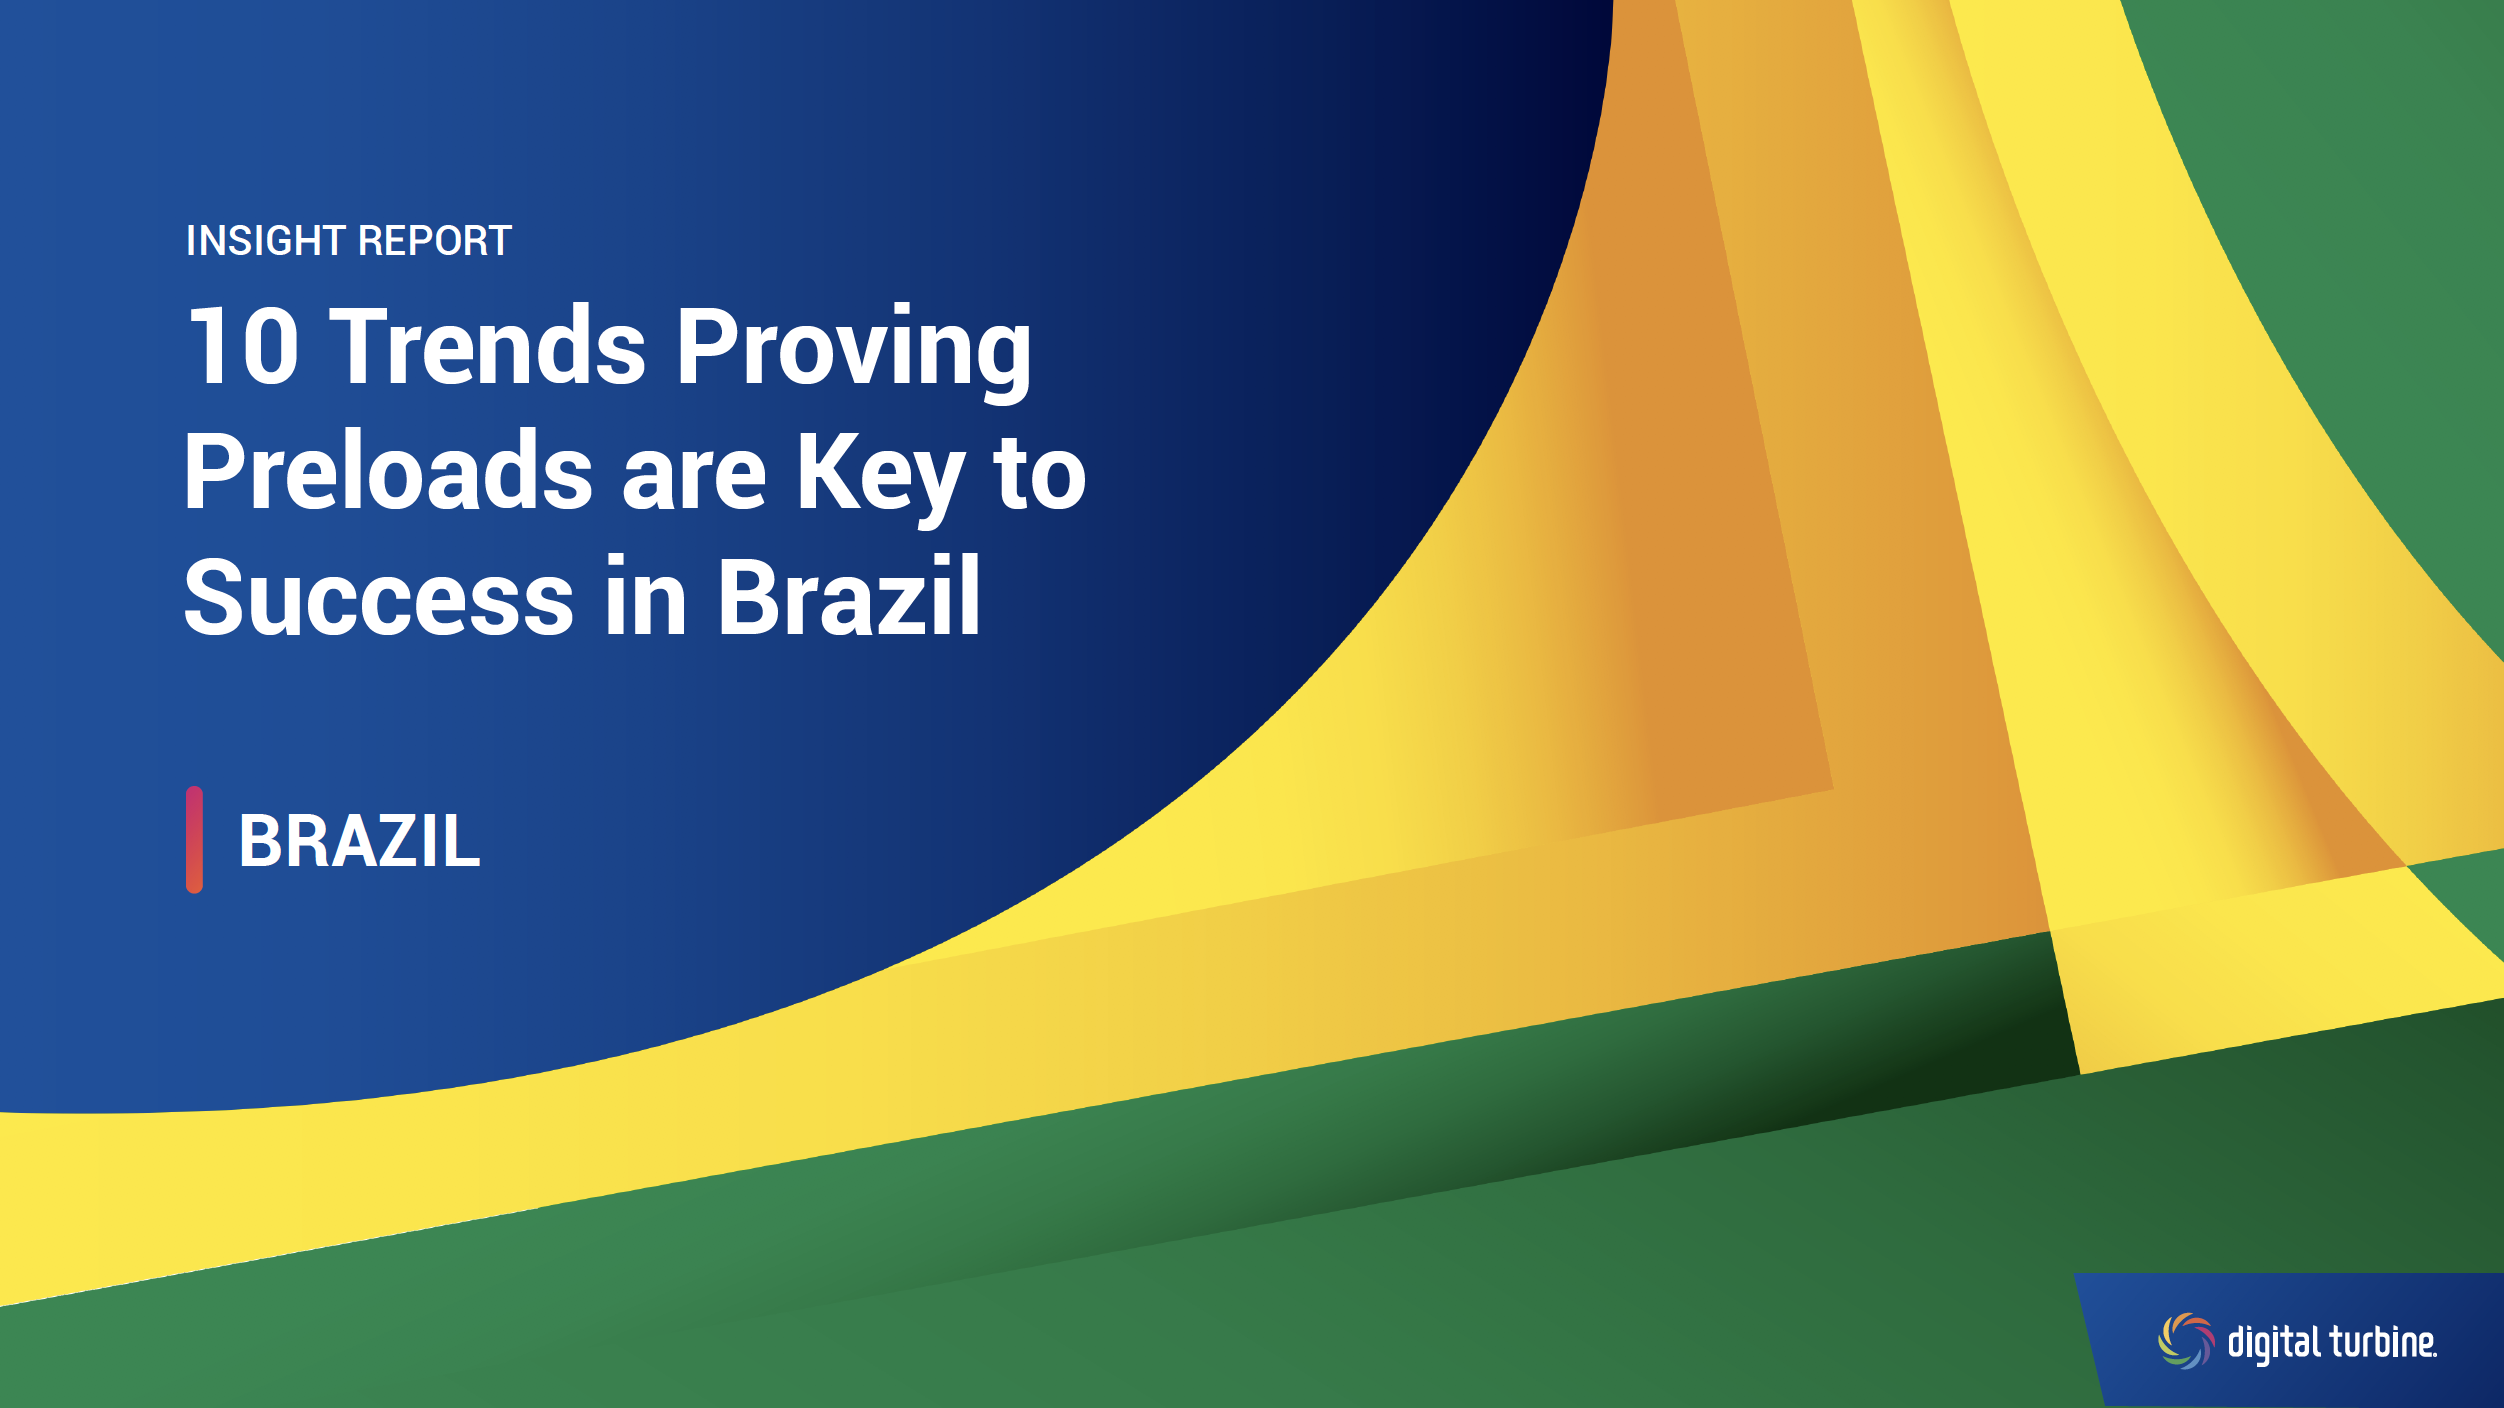 The Winning UA Strategy that will Grow Your Market Share in Brazil